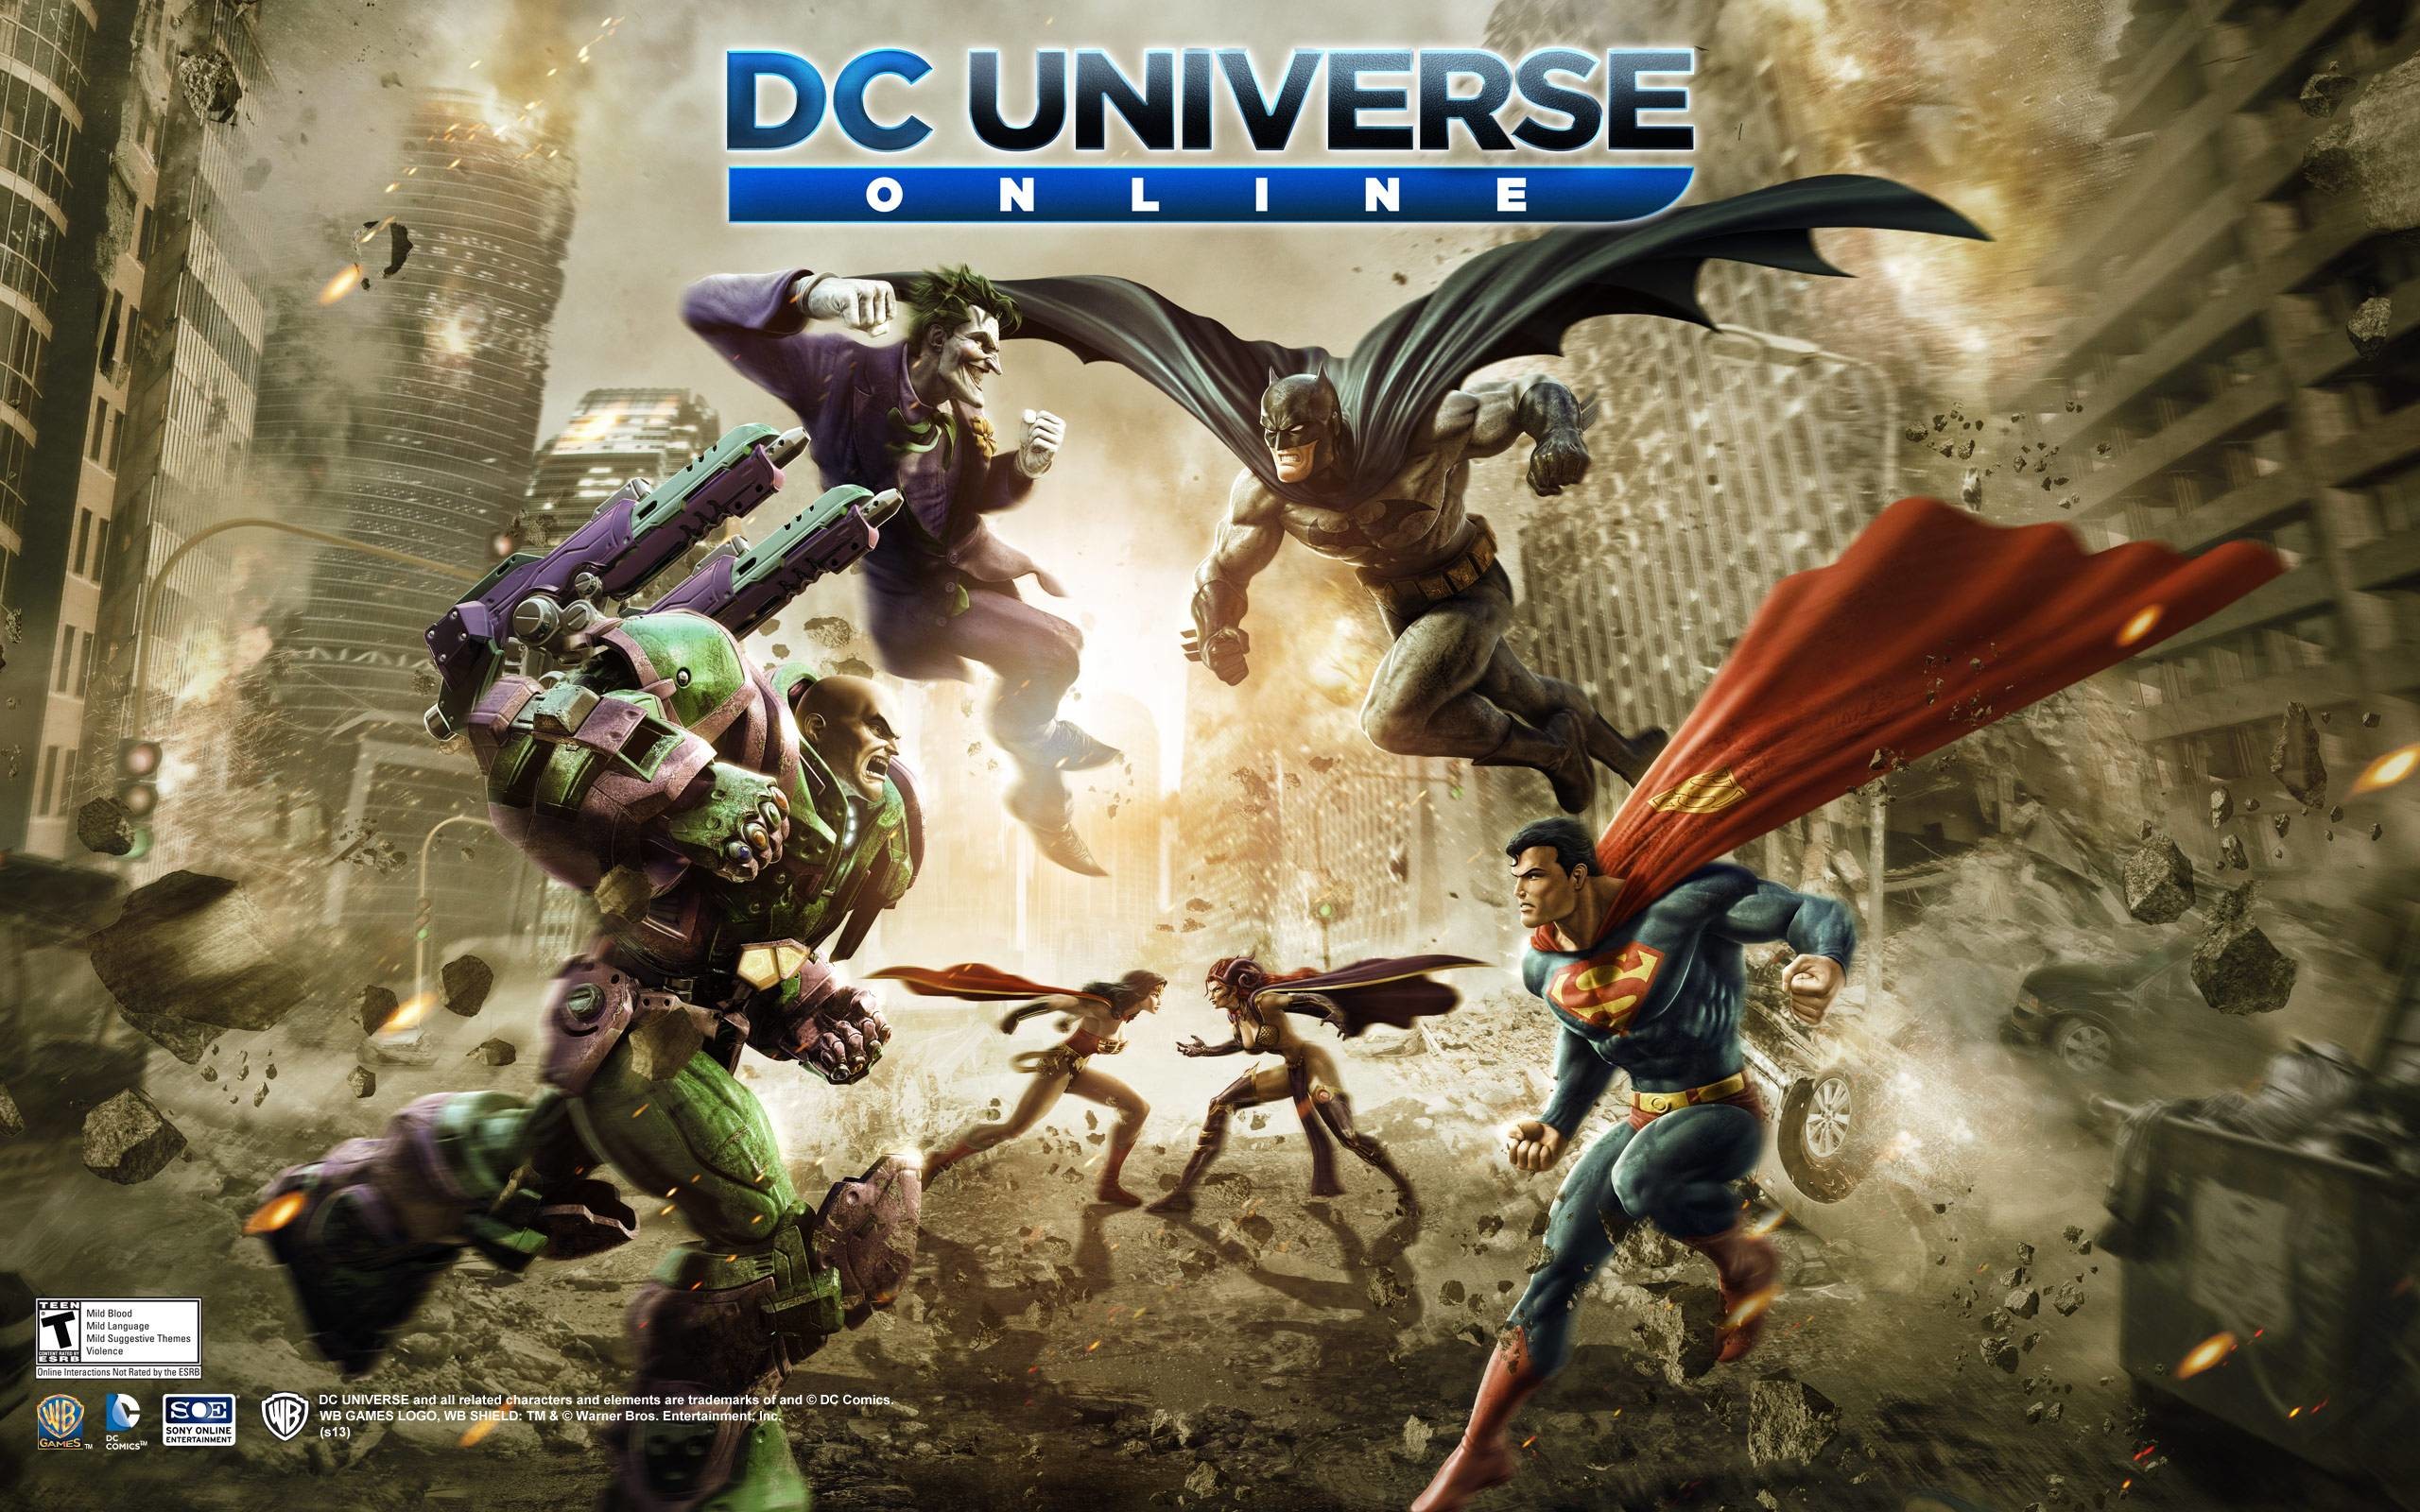 2560x1600 DC Universe Online Wallpapers | HD Wallpapers